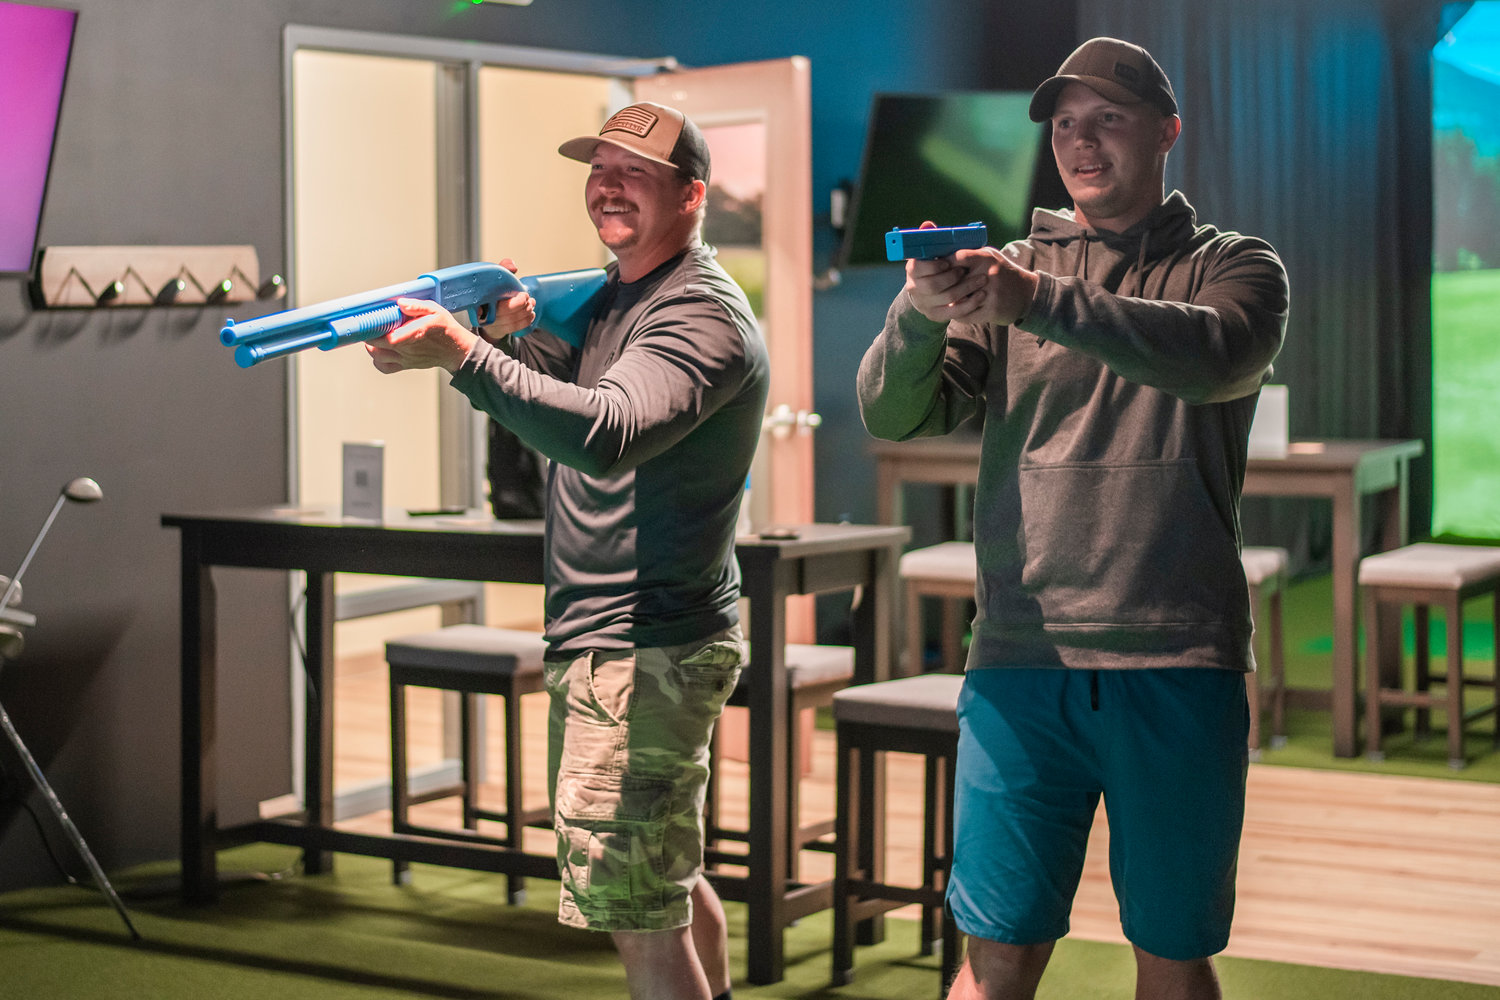 Visitors smile while using controllers shaped like weapons to fight monsters, aliens and zombies in various games at Par 4 Sports in Centralia.